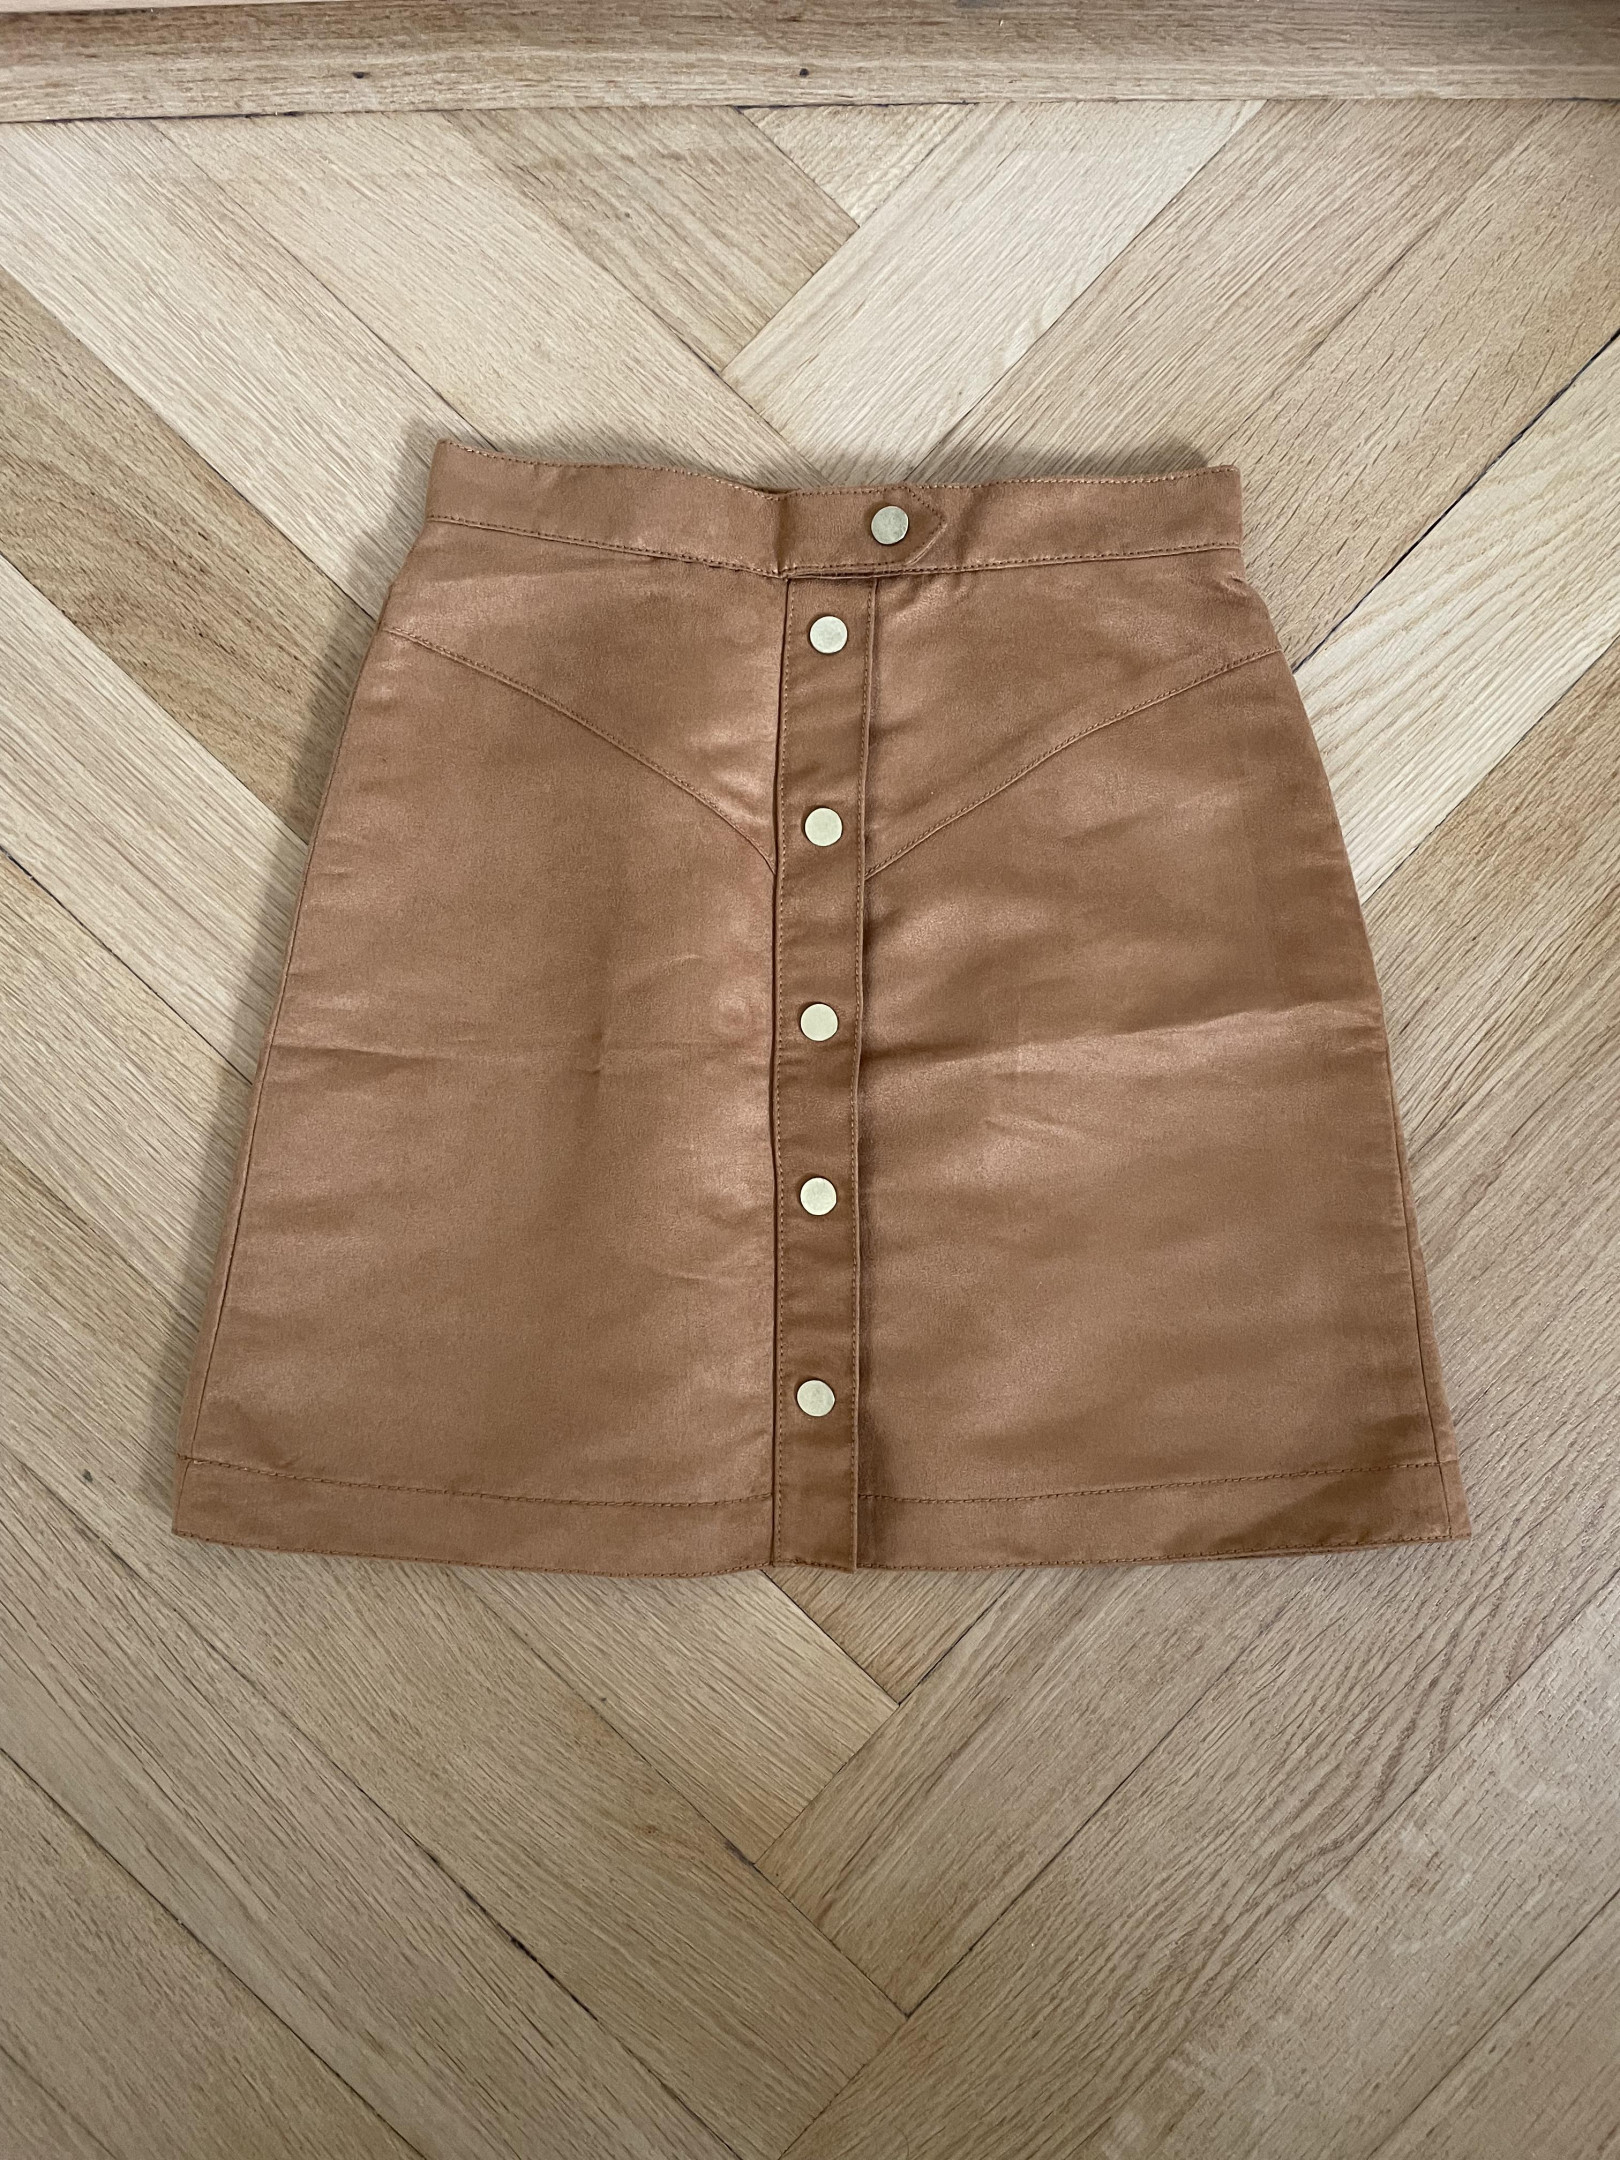 Suede effect skirt size 34